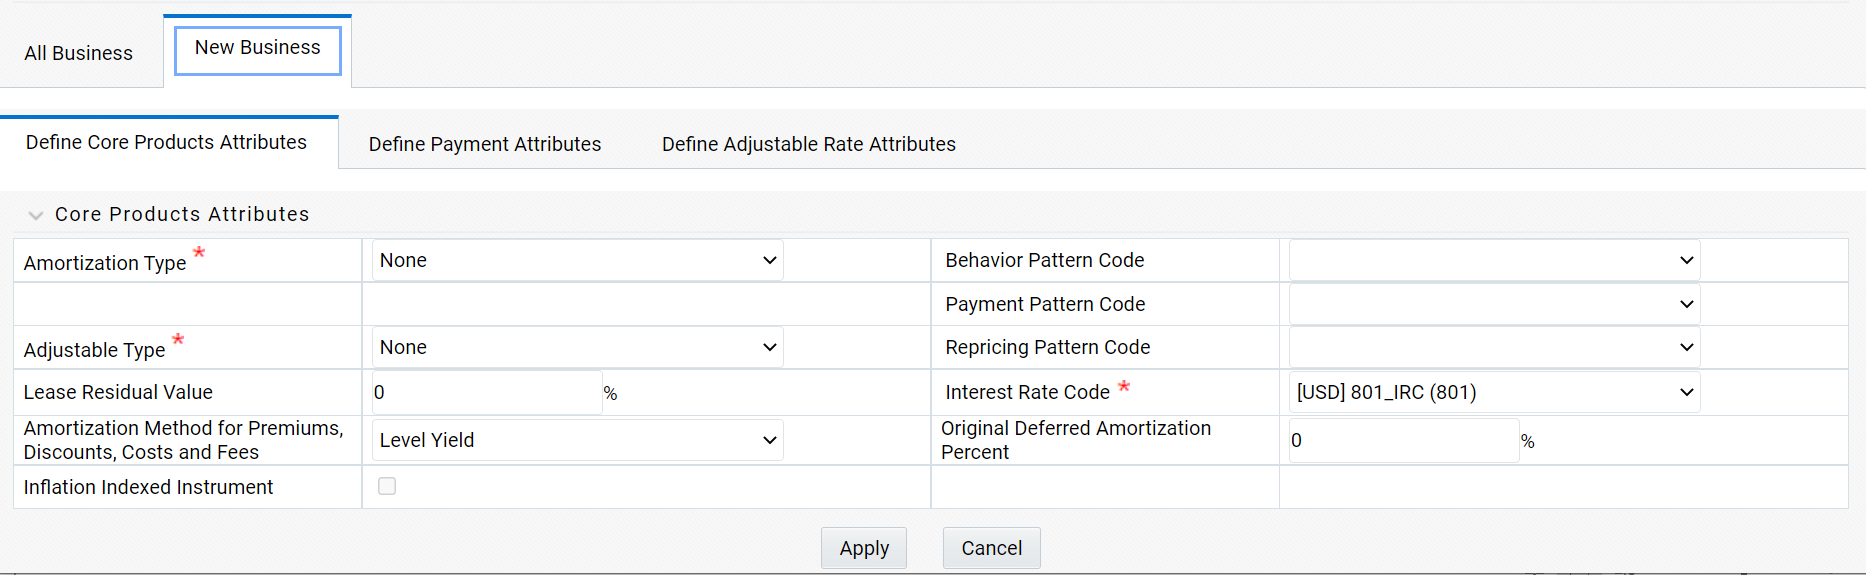 Define Core Products Attributes Tab to Define the Product Characteristic Rule